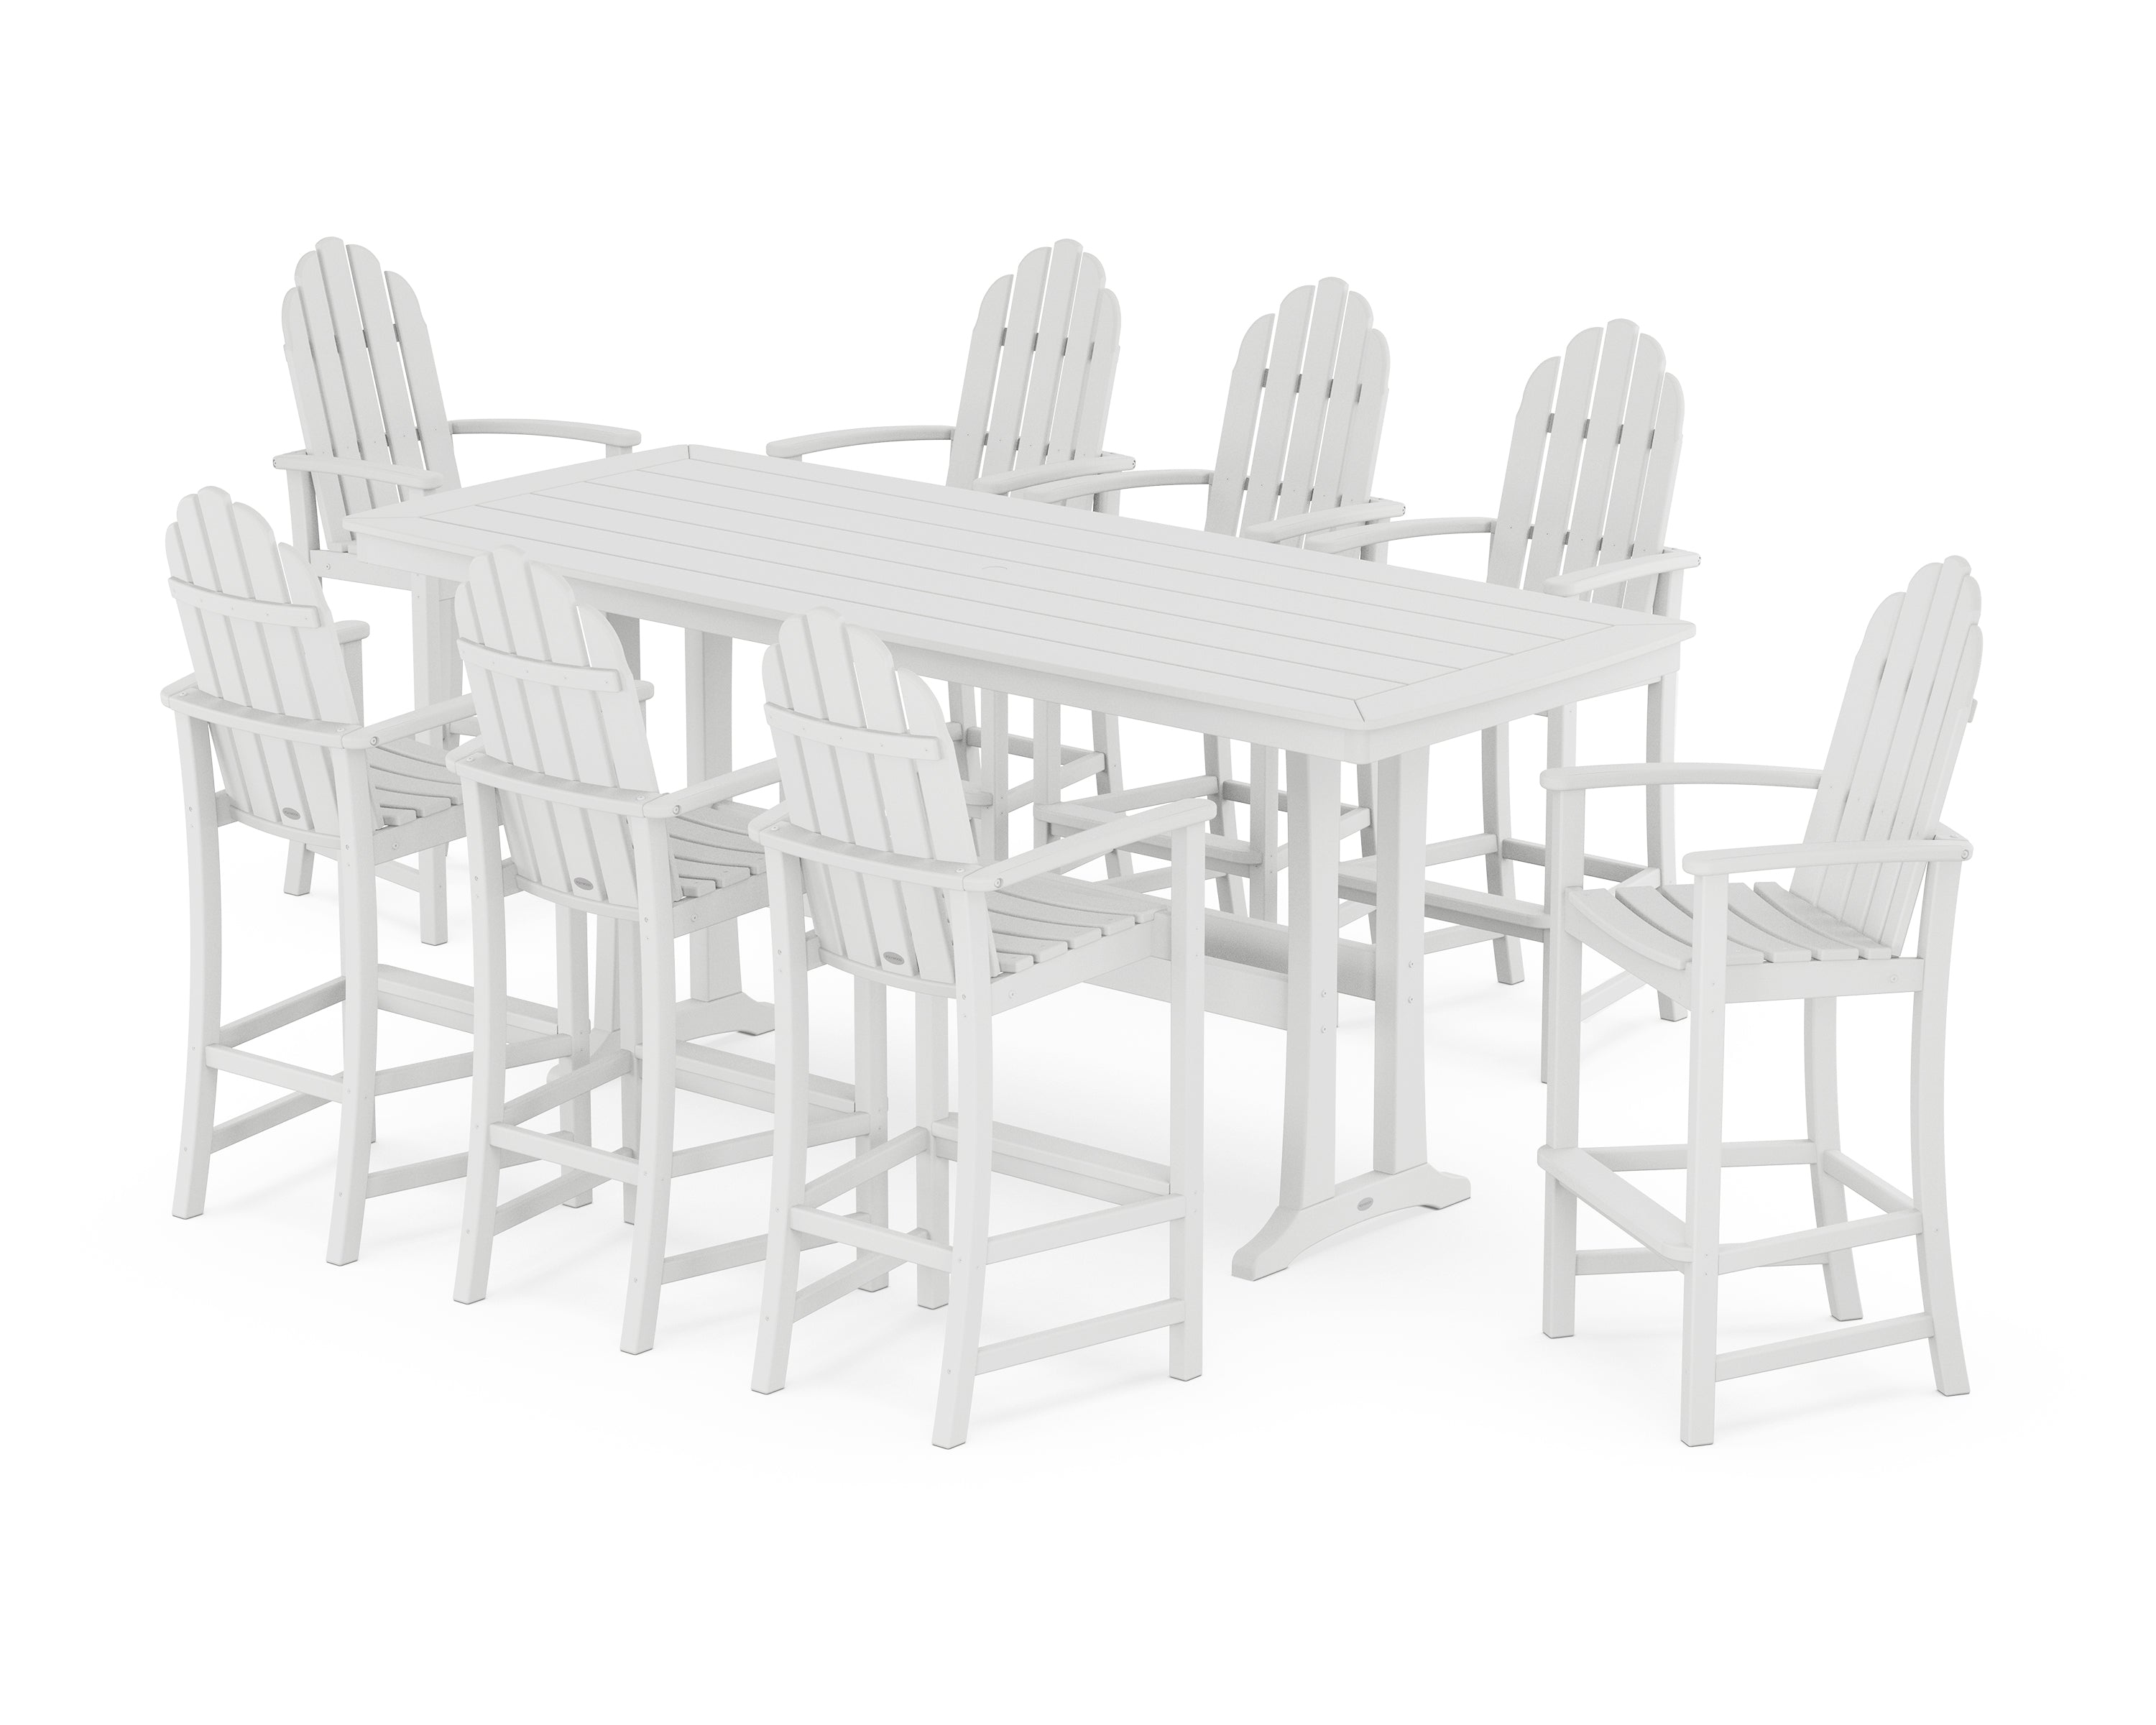 POLYWOOD® Classic Adirondack 9-Piece Bar Set with Trestle Legs in White